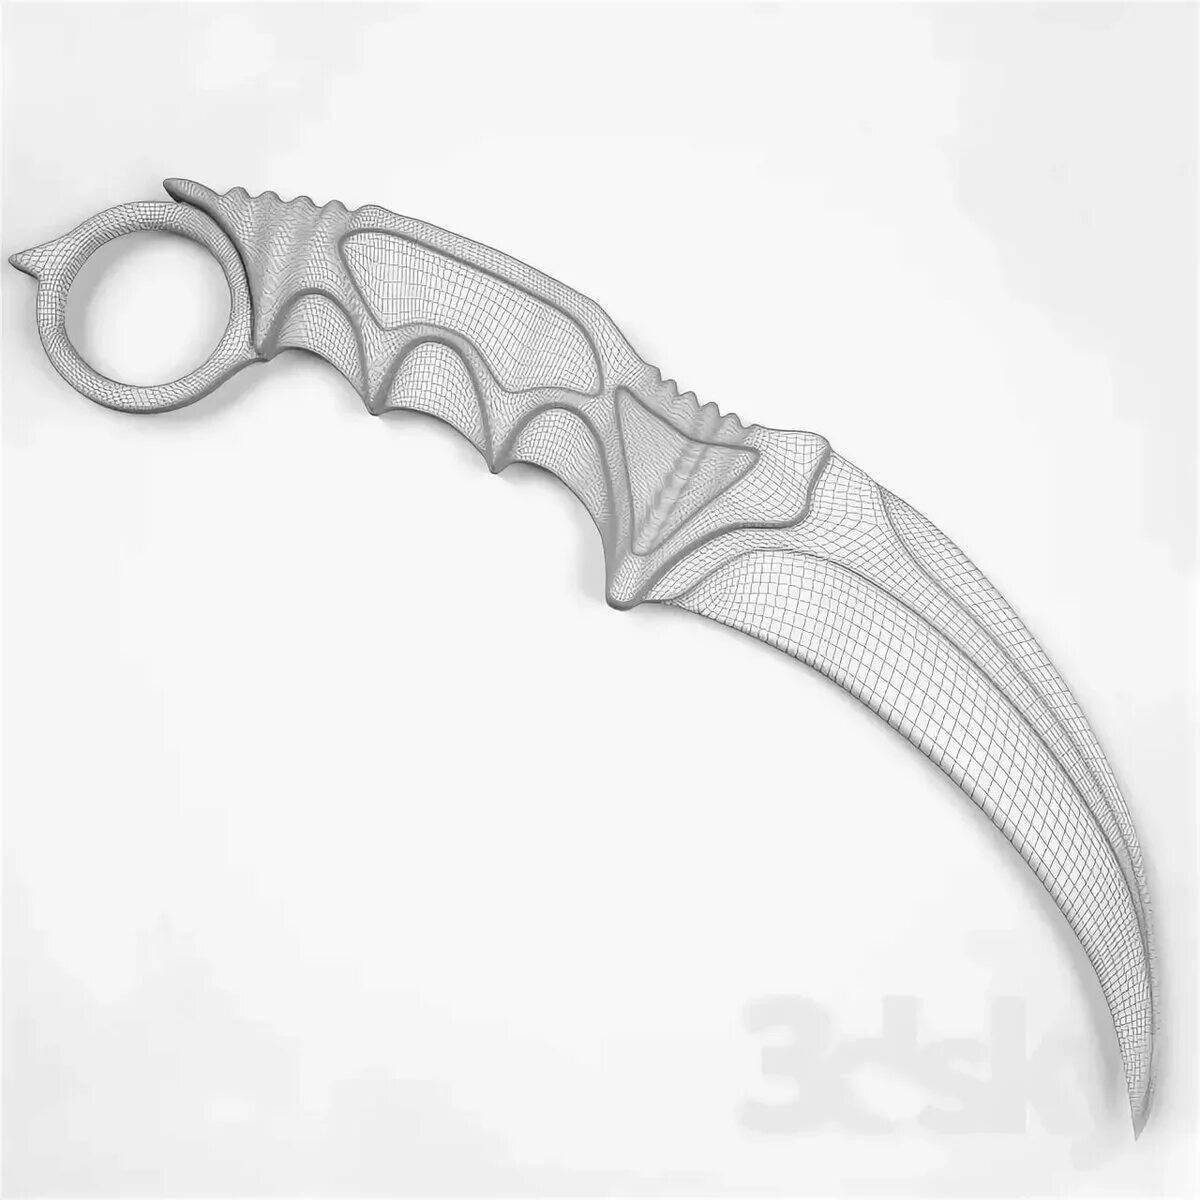 Karambit hit from confrontation